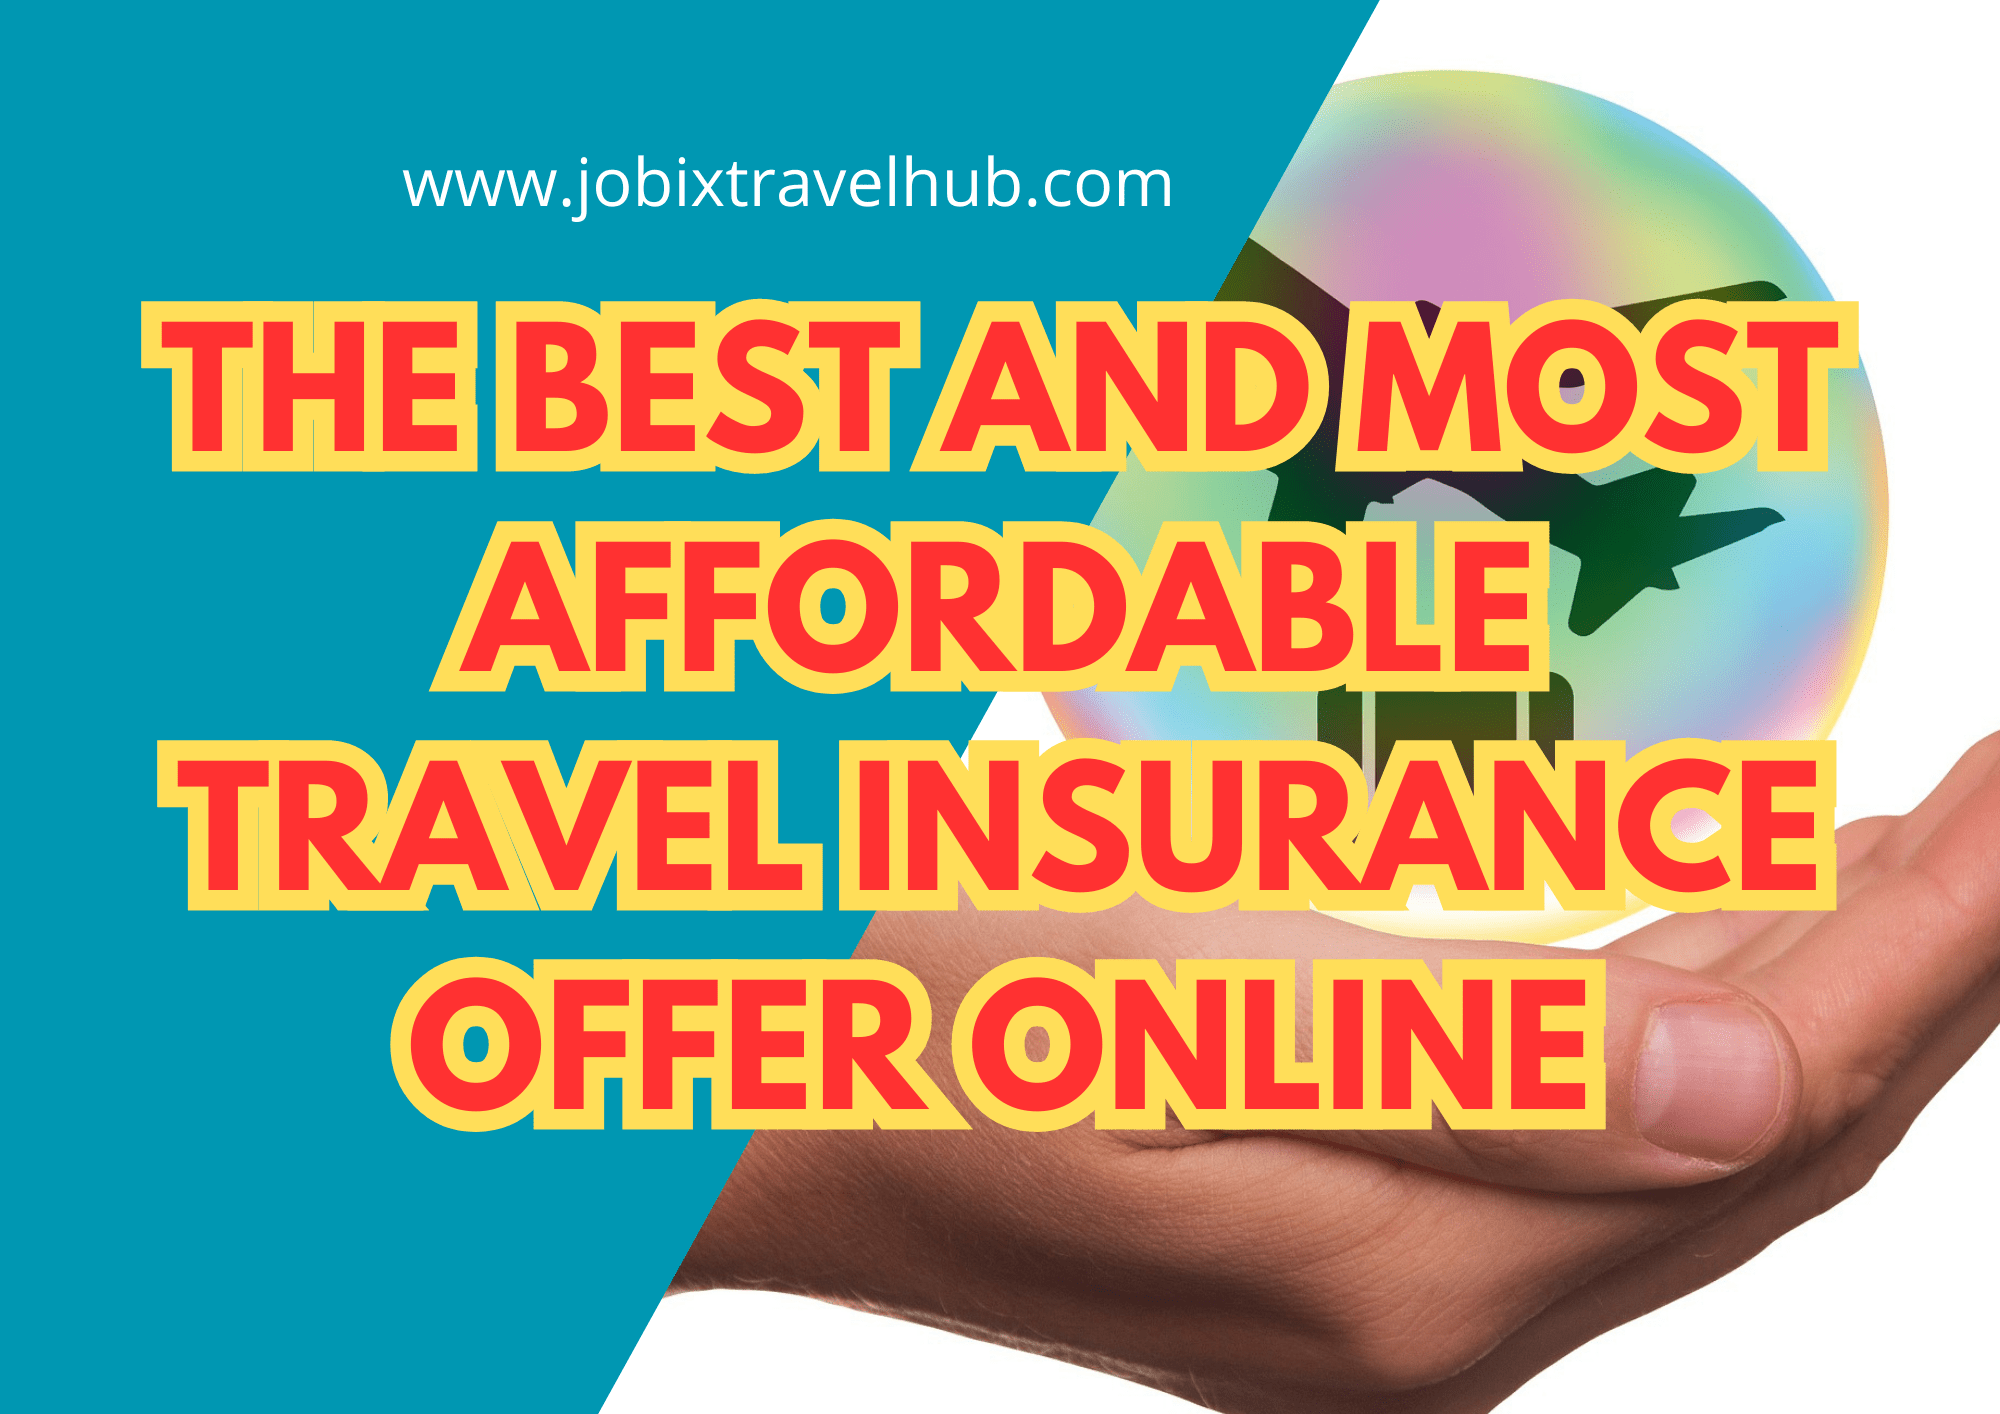 The Best And Most Affordable Travel Insurance Offer Online